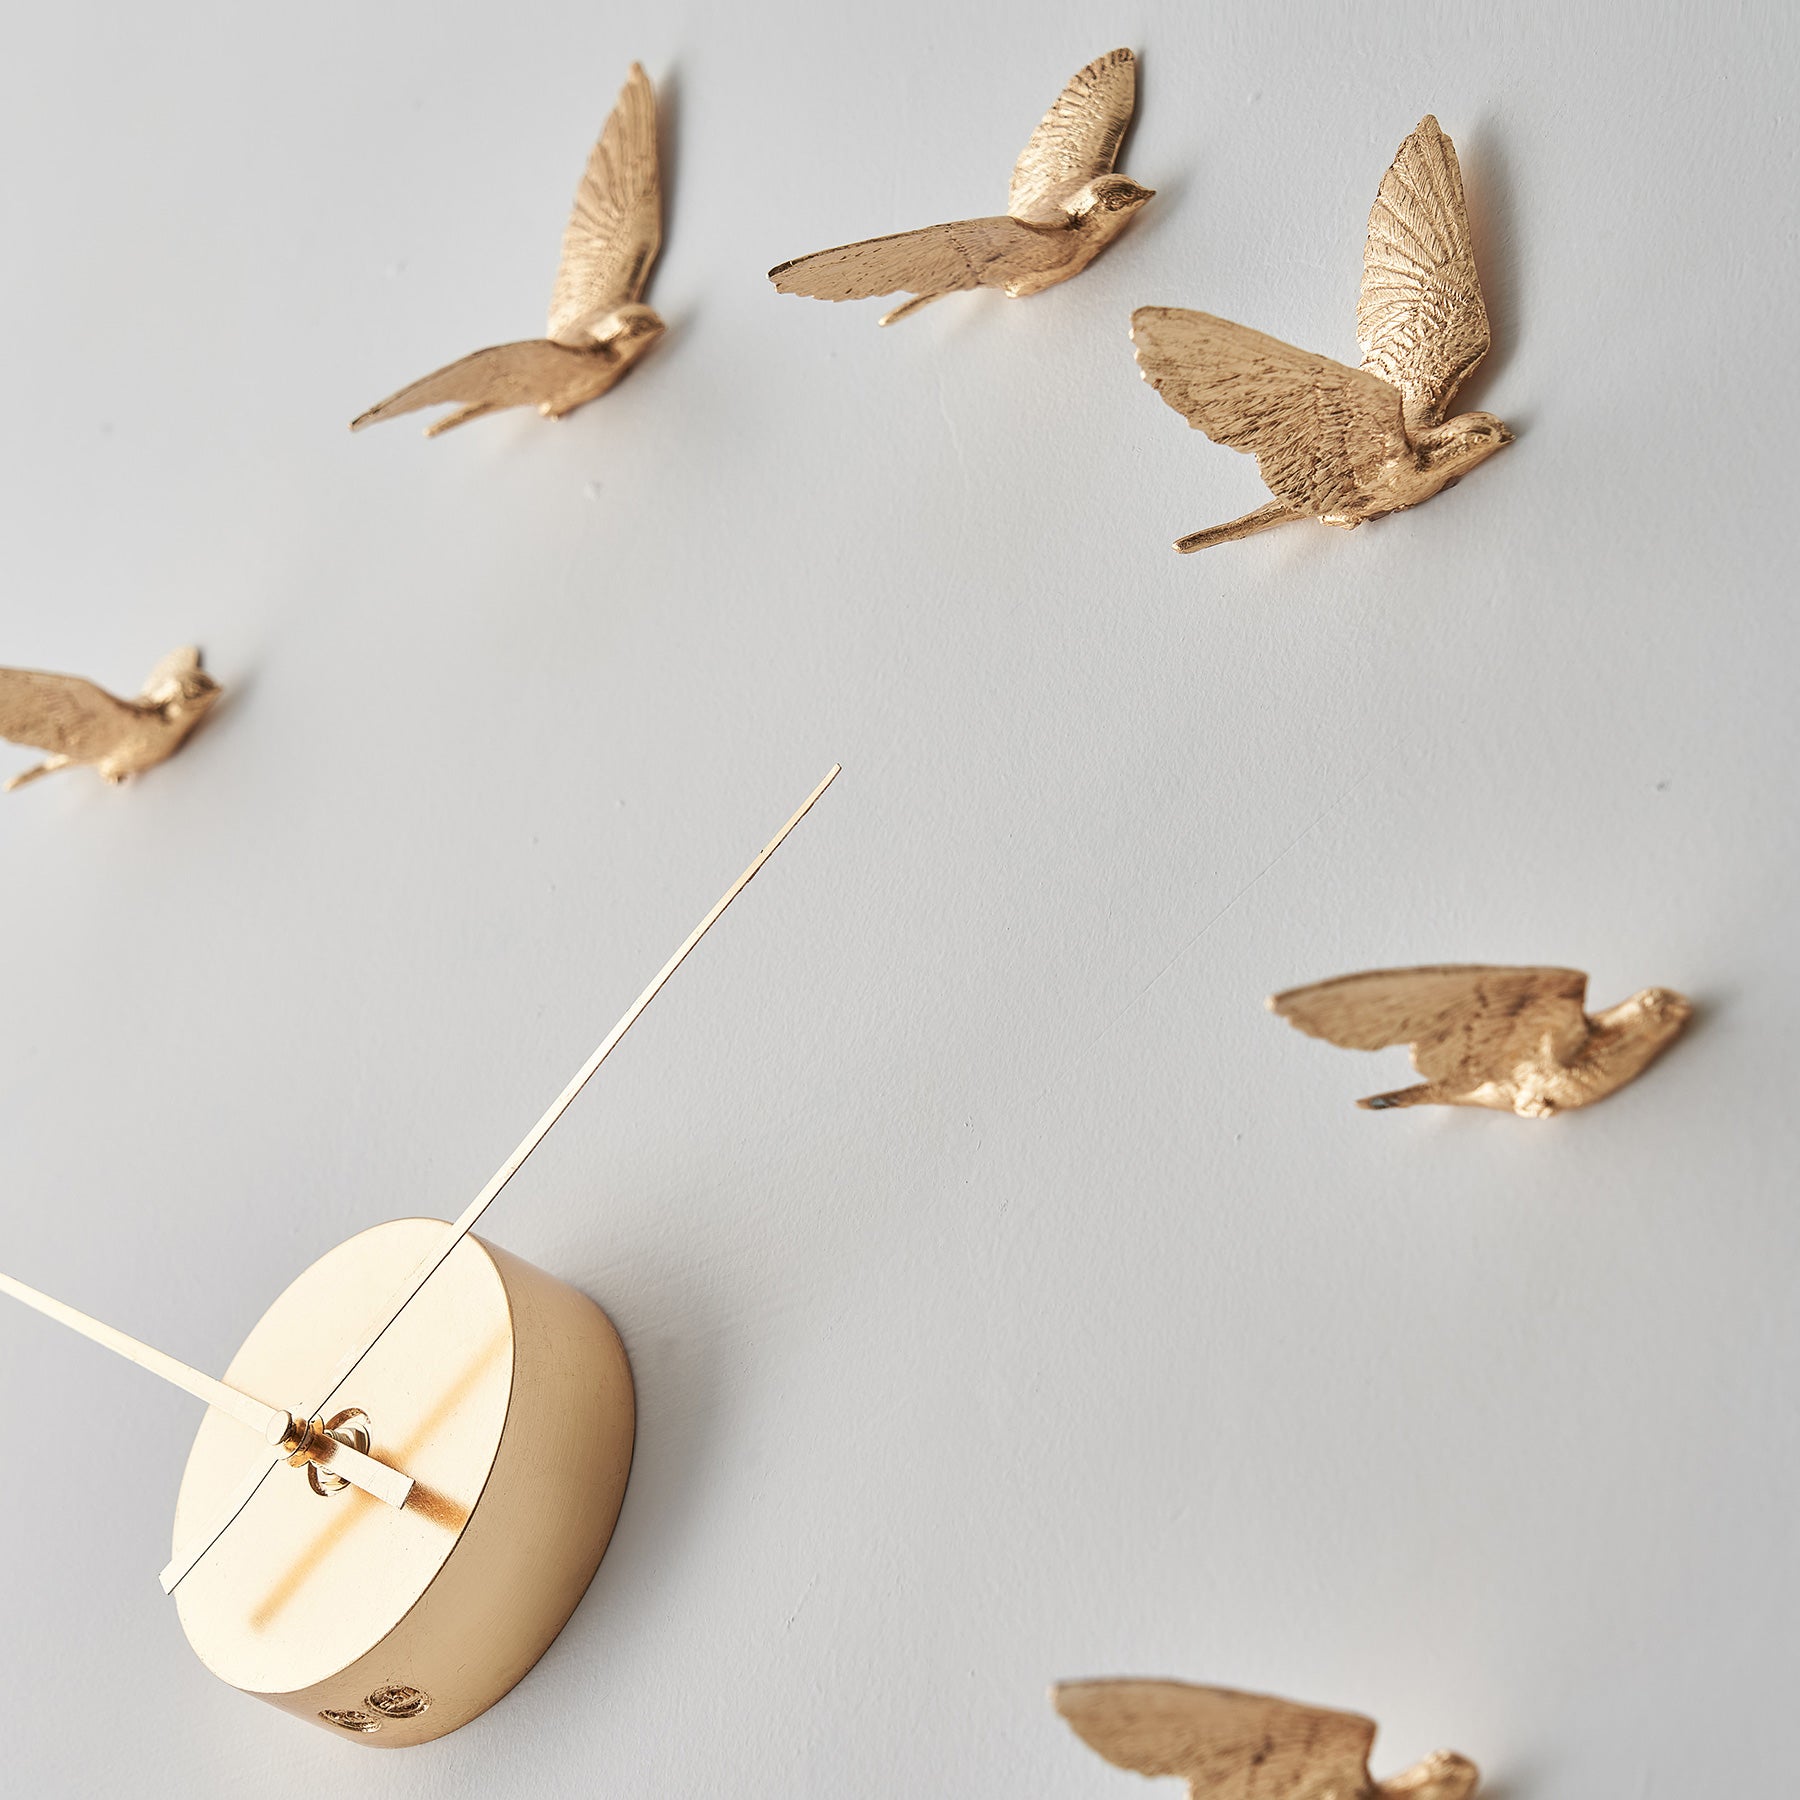 Contemporary and Modern Gold Wall Clock with Swallow Bird Sculpture